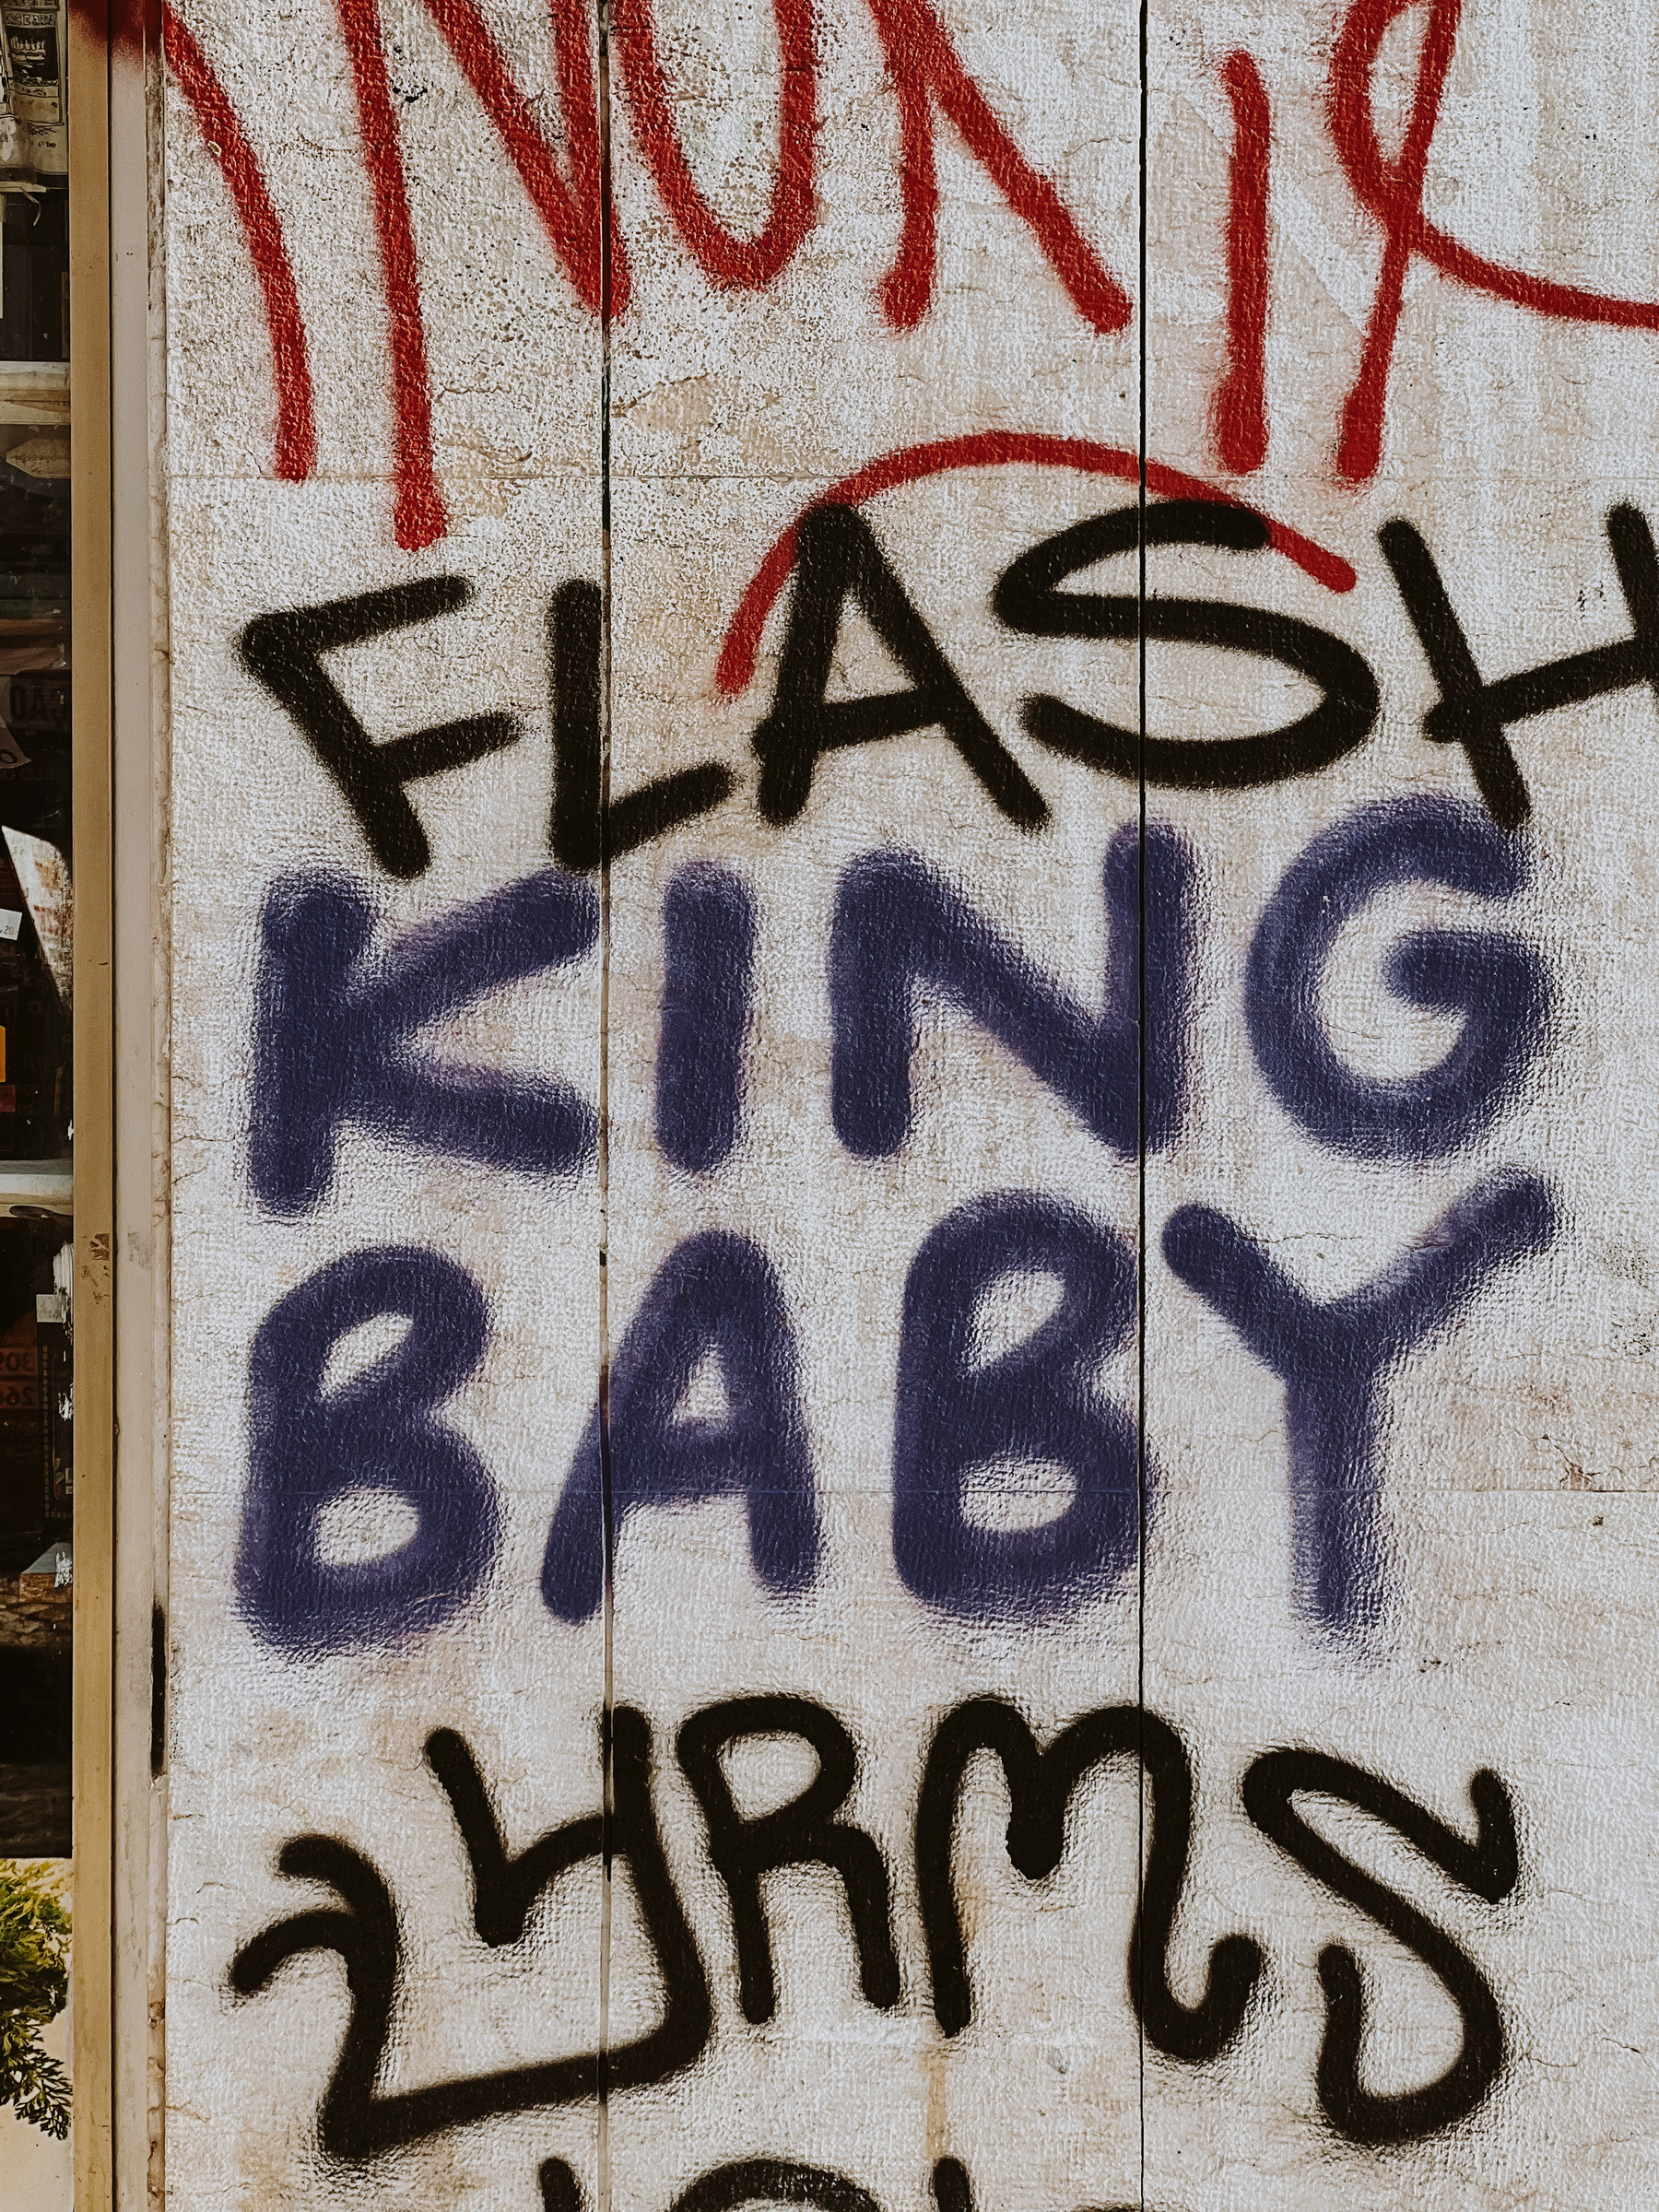 Graffiti on a wall with the words &ldquo;FLASH KING BABY&rdquo; in black and purple spray paint over a white background.